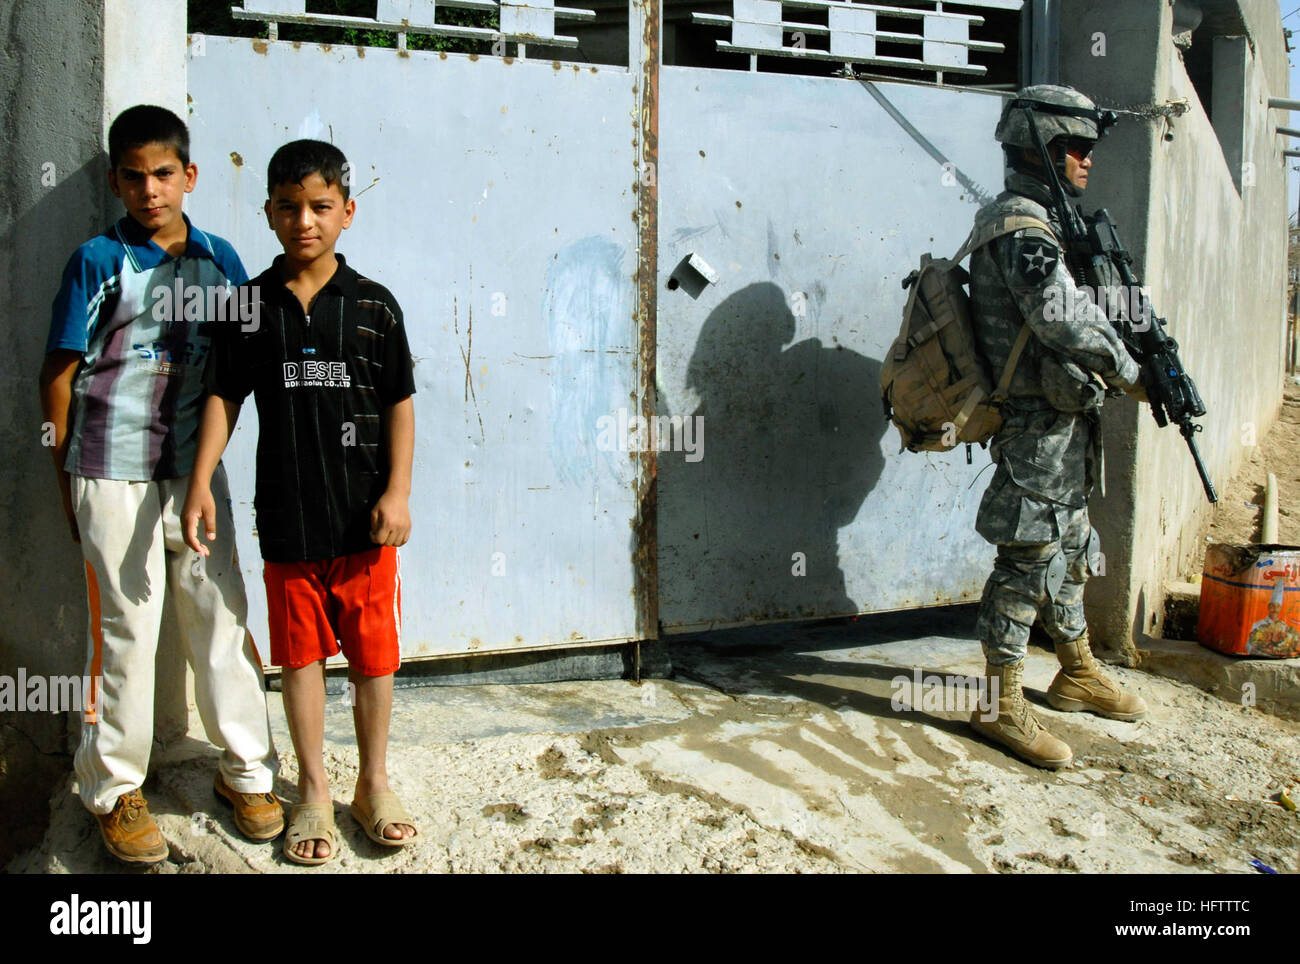 070712-N-9500T-055 KHAN BANI SA'AD, Iraq (July 12, 2007) - Two Iraqi boys watch a convoy of U.S. Army and Iraqi army vehicles drive past while Staff Sgt. Sophearak Huy keeps an eye on an alley during a mission. U.S. and Iraqi army units conducted a cordon and search mission near Khan Bani Sa'ad to clear the area of insurgents and cache sites. U.S. Navy photo by Mass Communication Specialist 2nd Class Scott Taylor (RELEASED) US Navy 070712-N-9500T-055 Two Iraqi boys watch a convoy of U.S. Army and Iraqi army vehicles drive past while Staff Sgt. Sophearak Huy keeps an eye on an alley during a mi Stock Photo